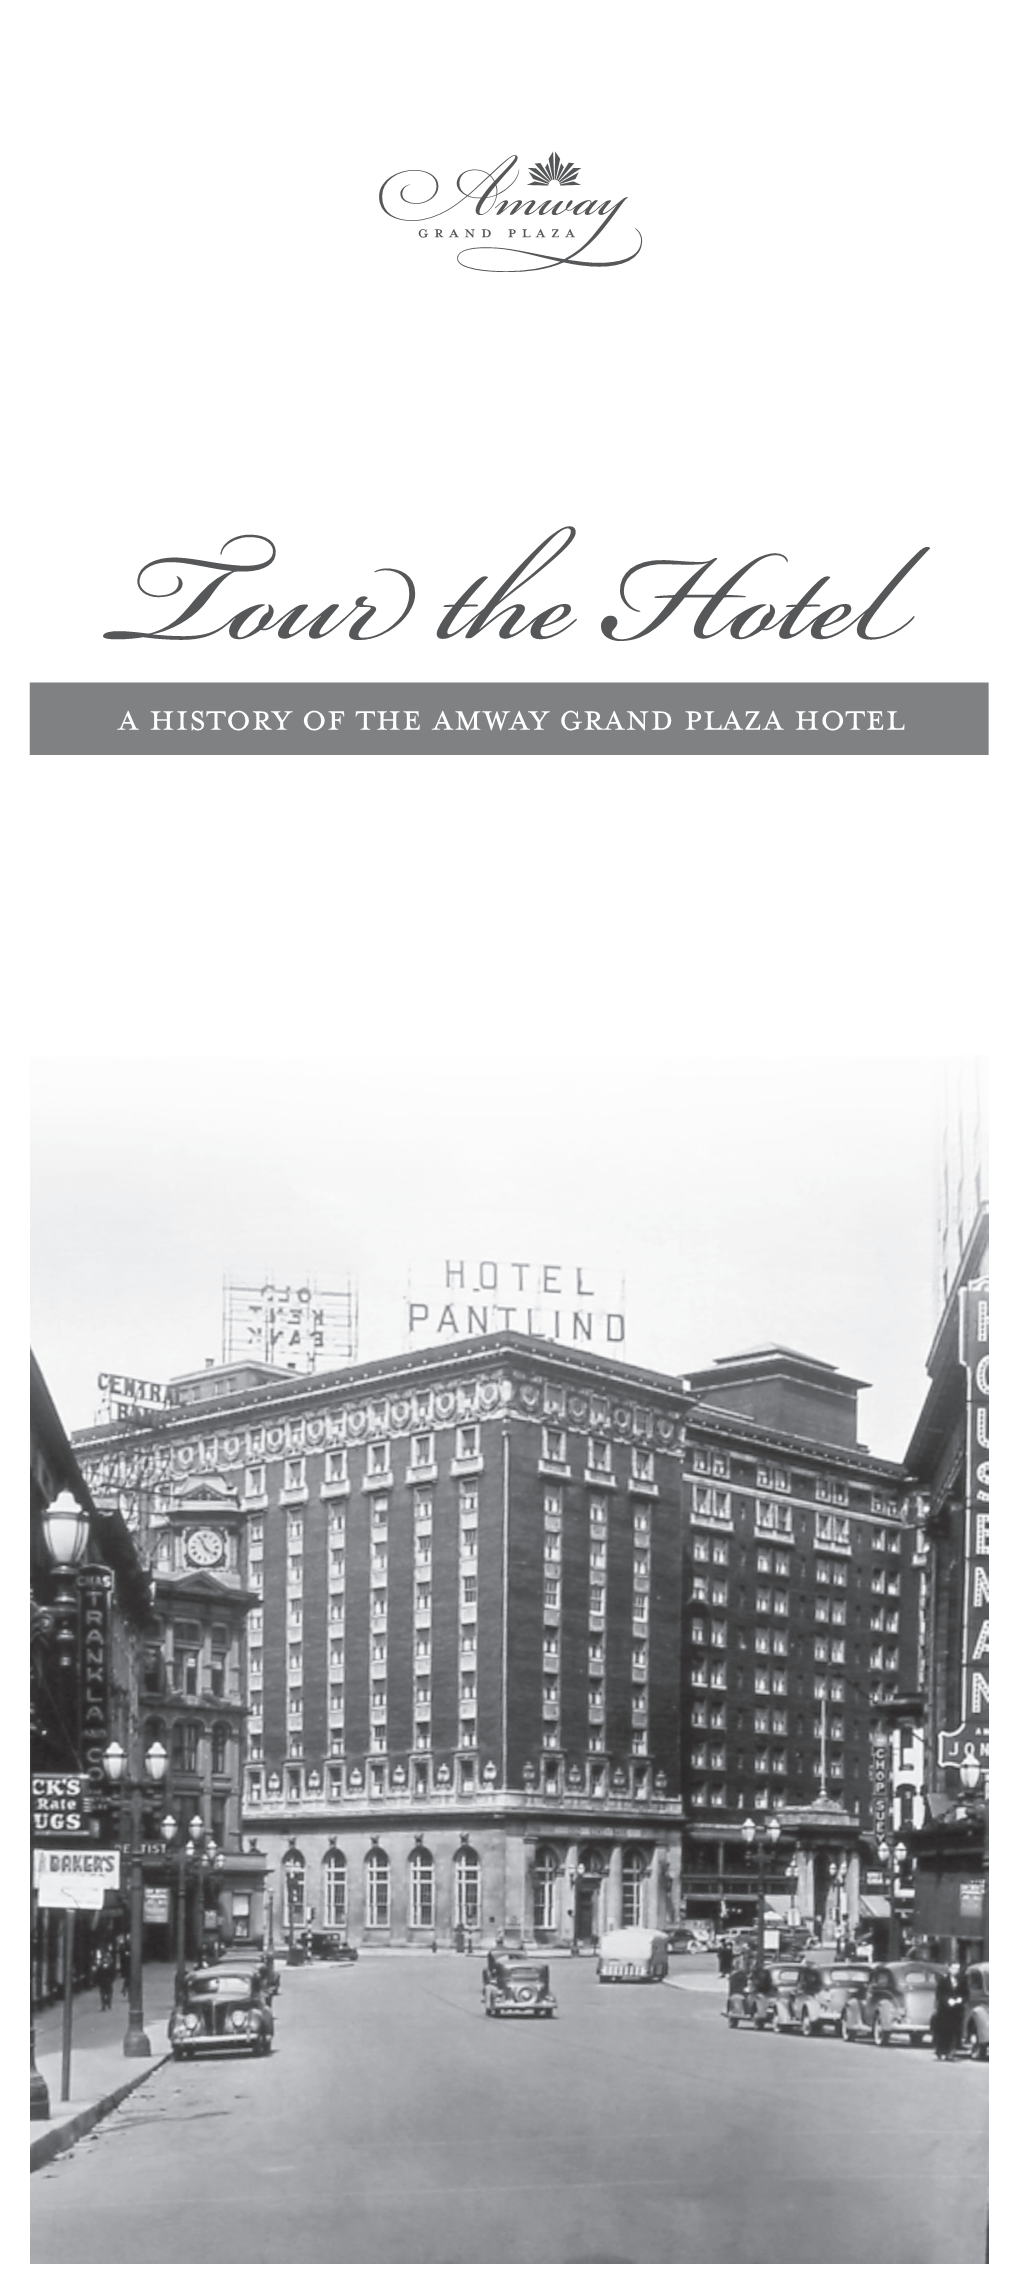 Tour the Hotel and Experience Days Gone By